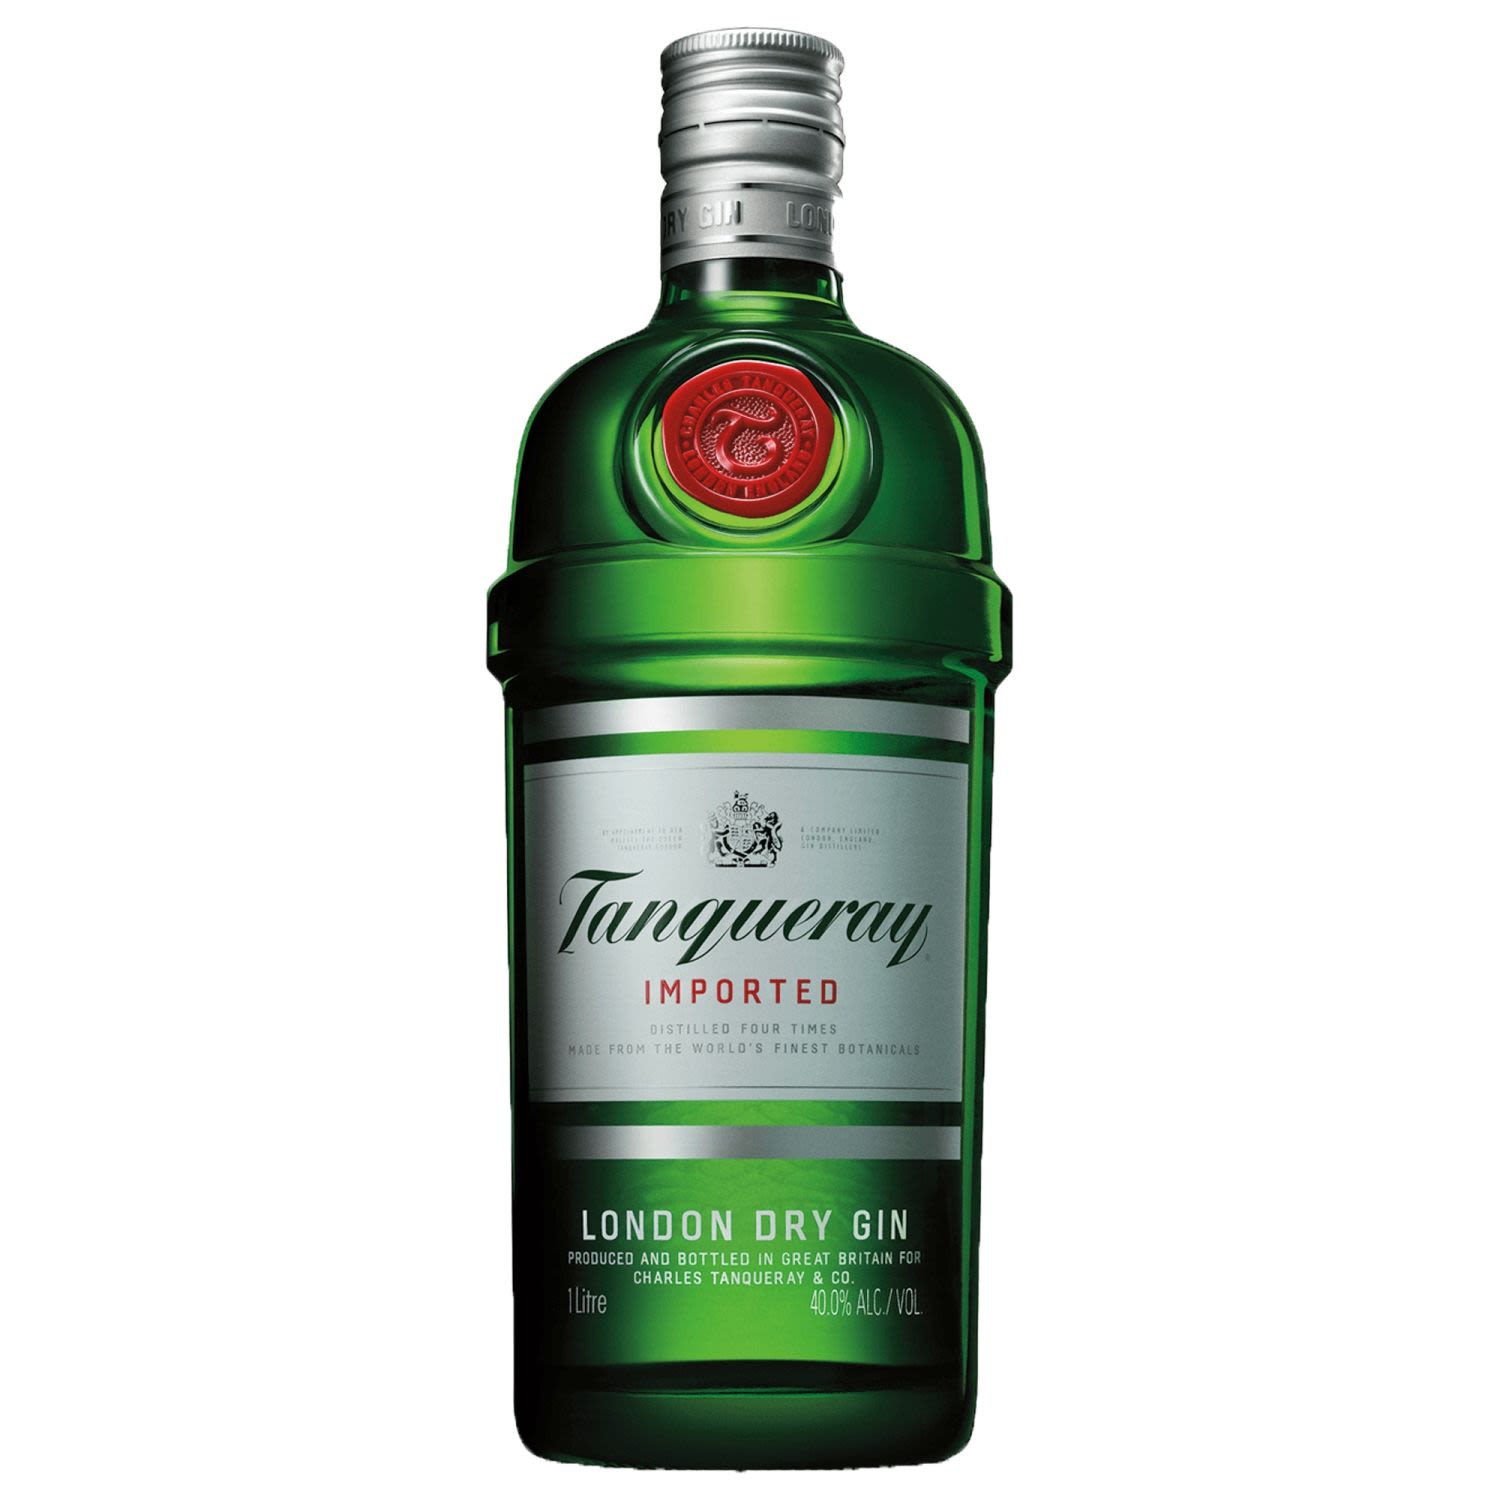 Tanqueray London Dry Gin 1L Bottle